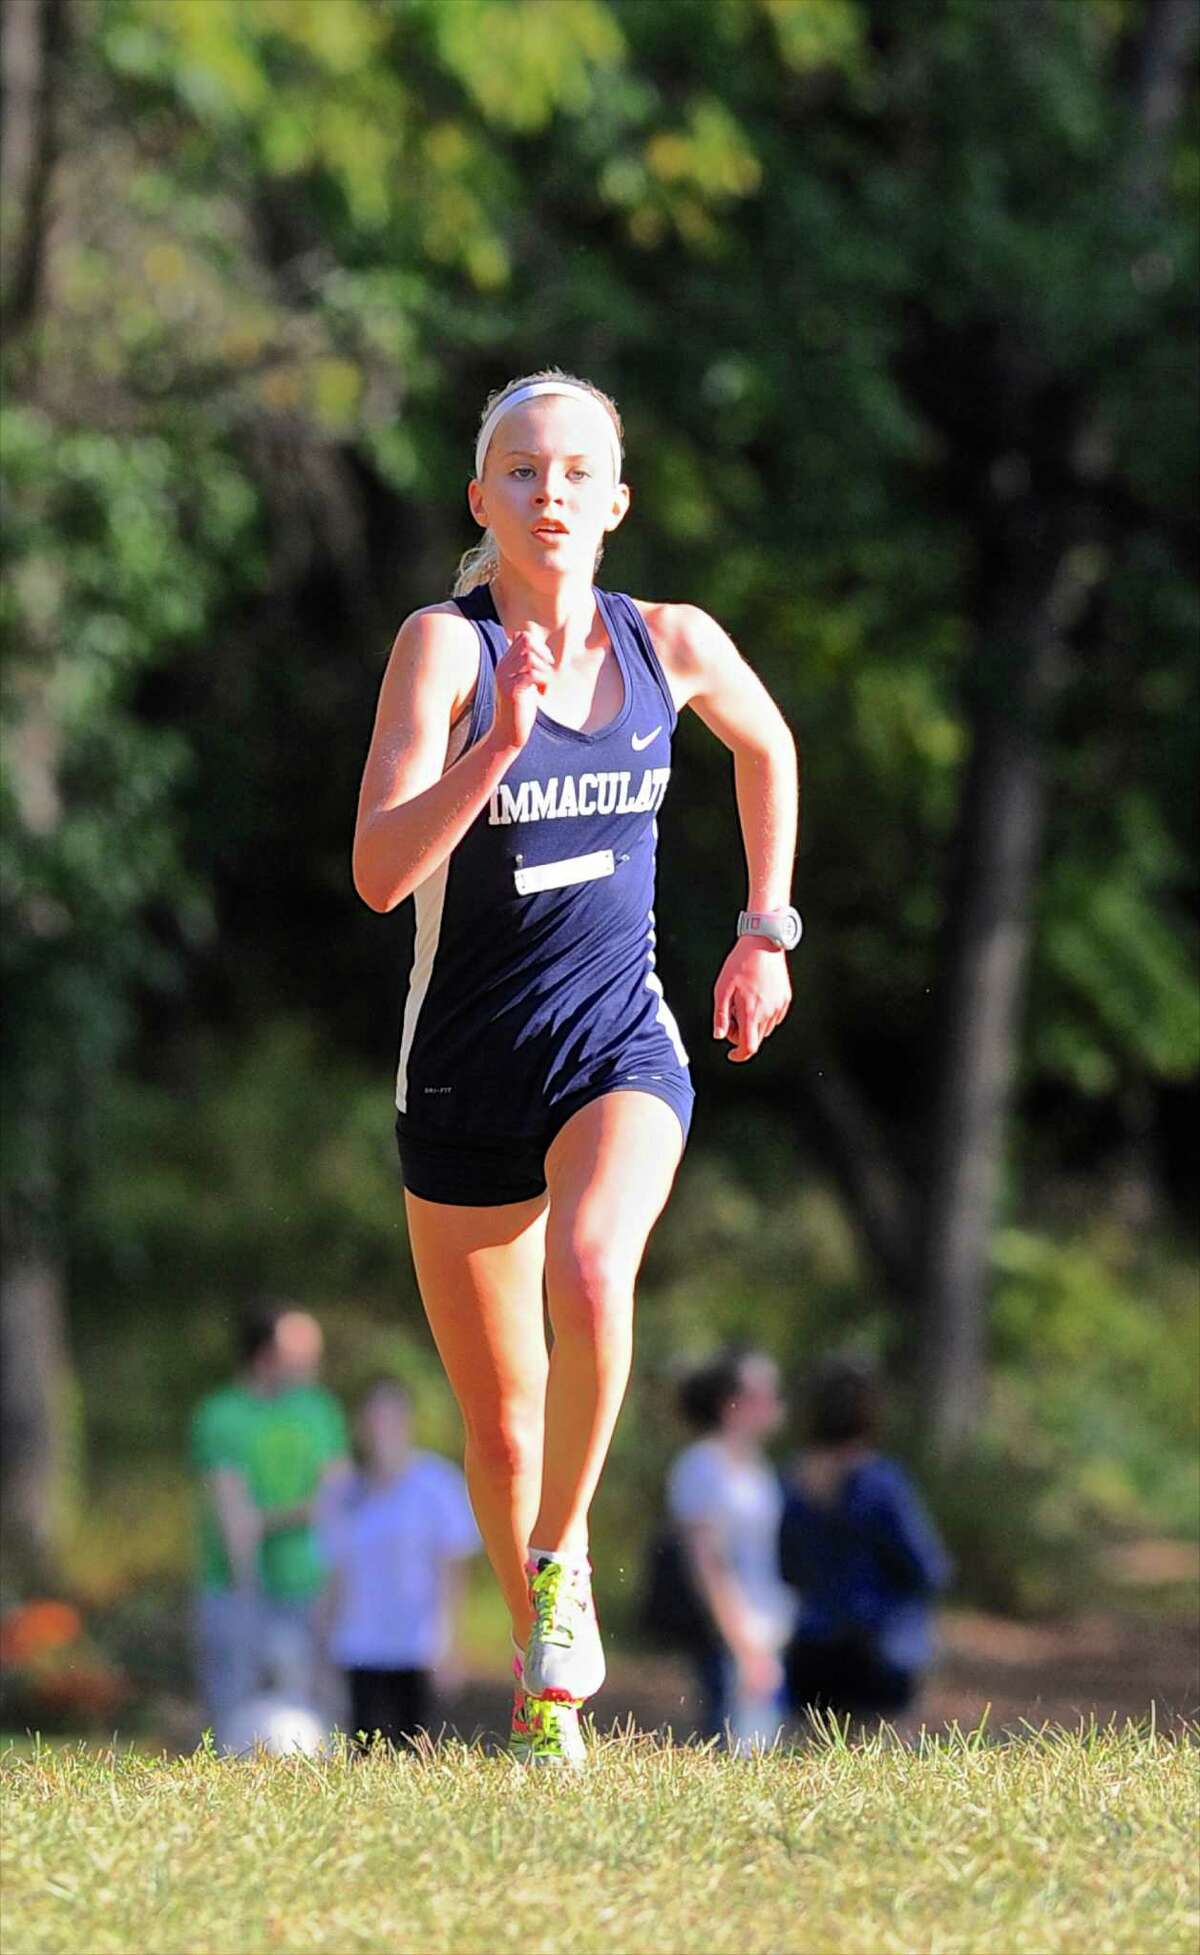 Immaculate's Angela Saidman was the first place finisher in the girls high school cross country meet between Stratford, New Milford, Newtown and Immaculate high schools on Tuesday afternoon, September 27, 2016, at Tarrywile Park, in Danbury, Conn.